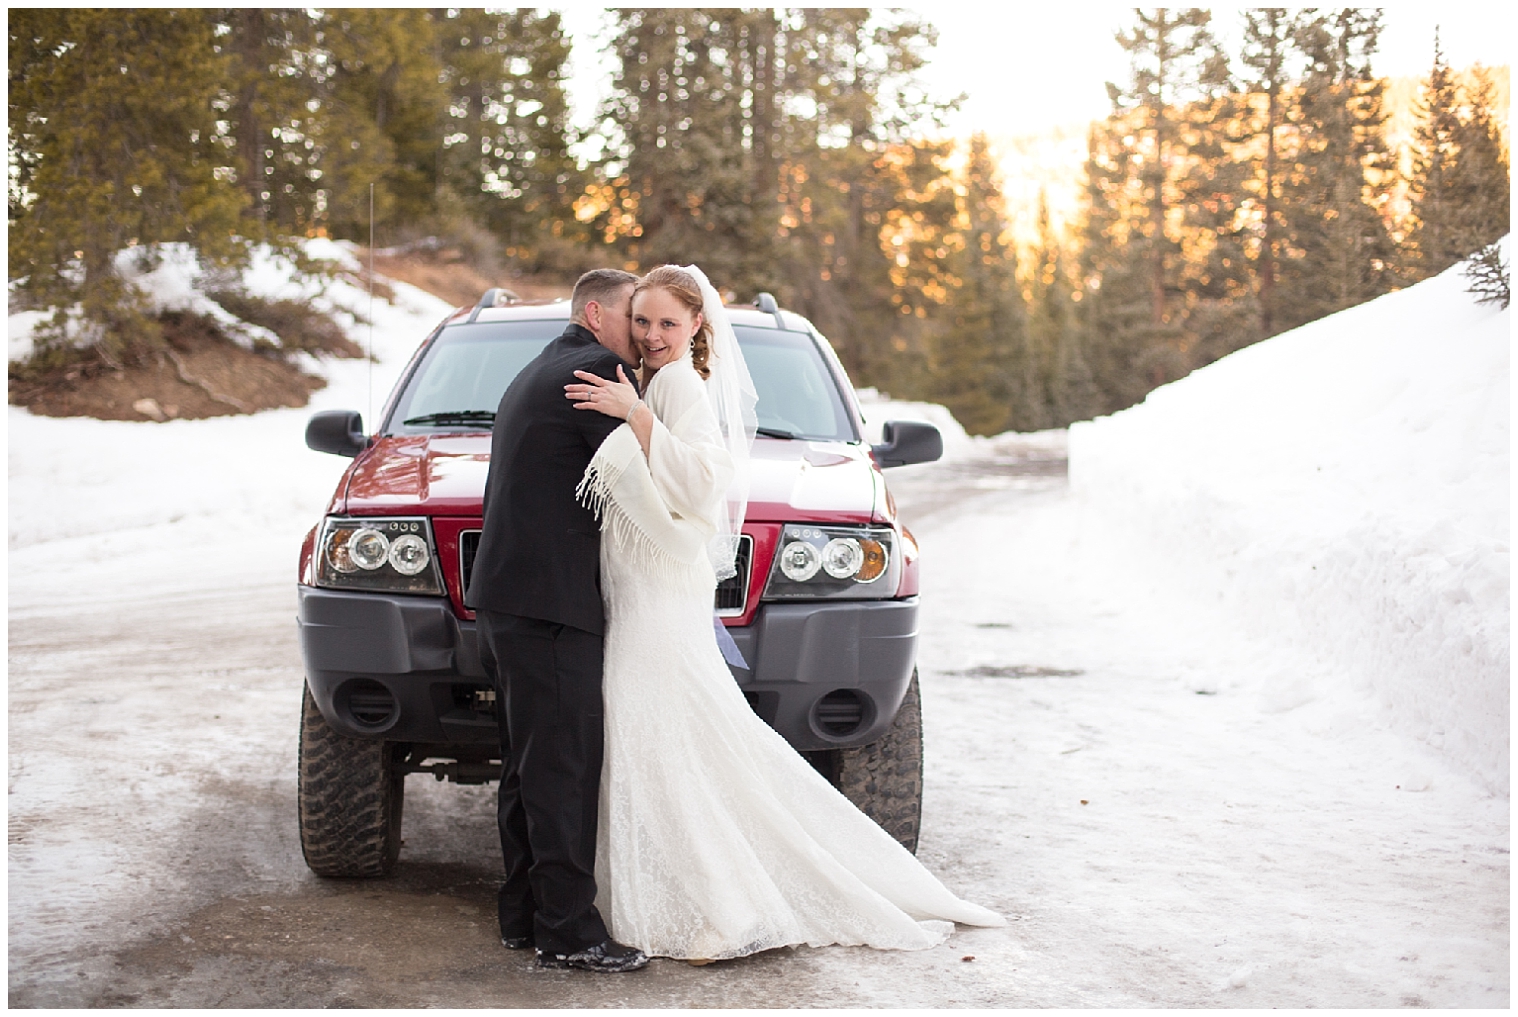 The wedding couple stand together in front of the groom's jeep for portraits at their Breckenridge elopement.